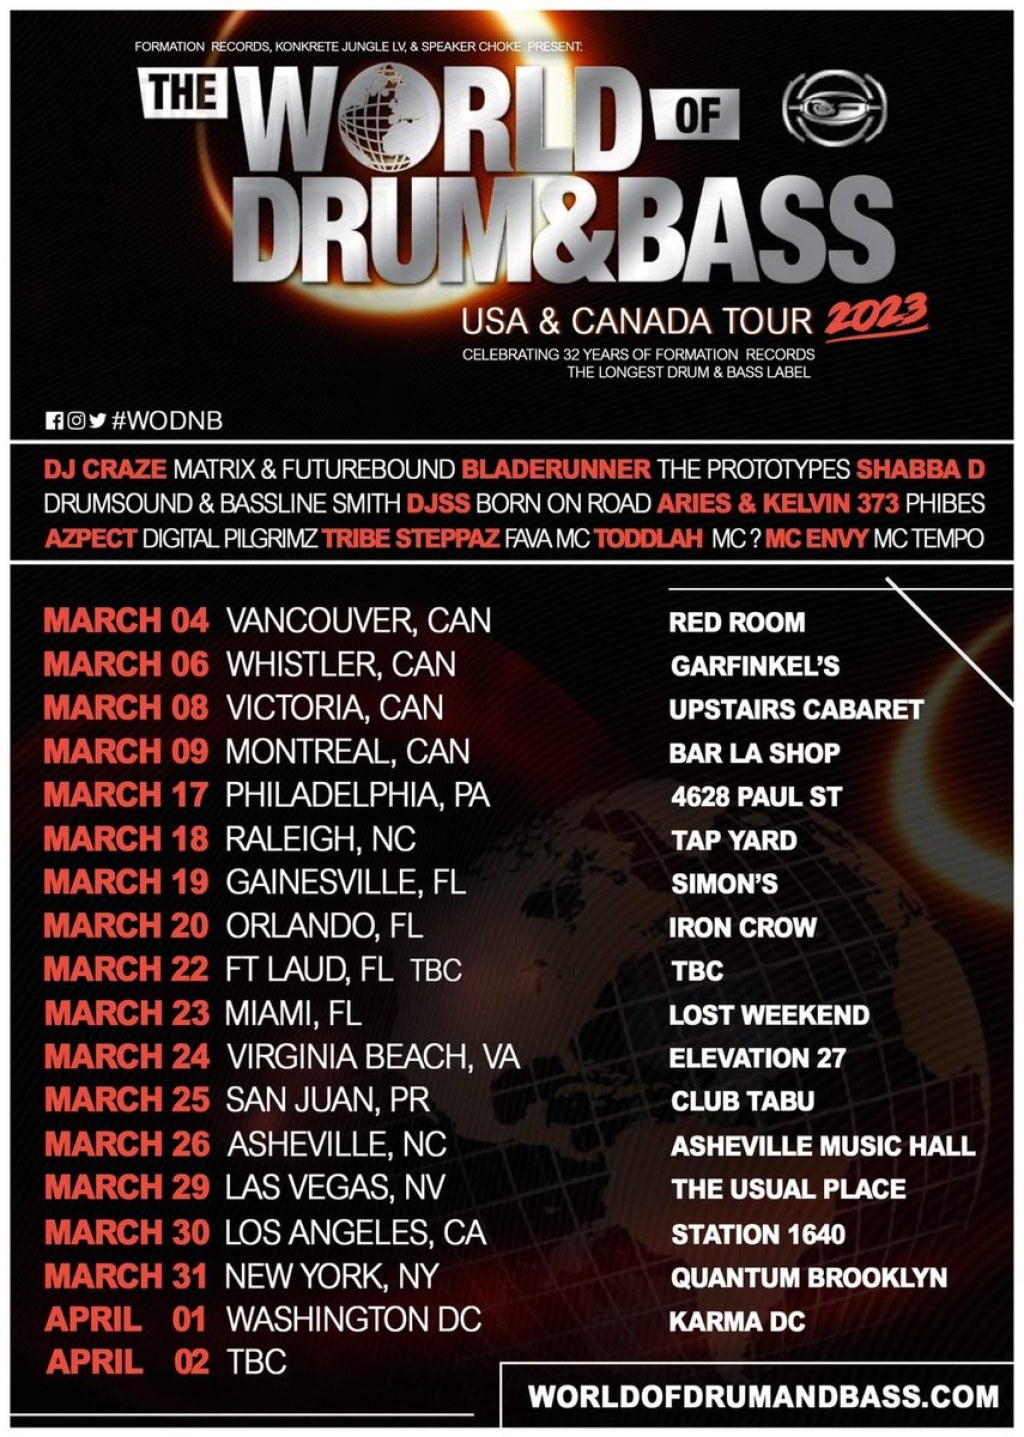 the world of drum and bass tour 2023 - WODNB (@WODNB) / Twitter